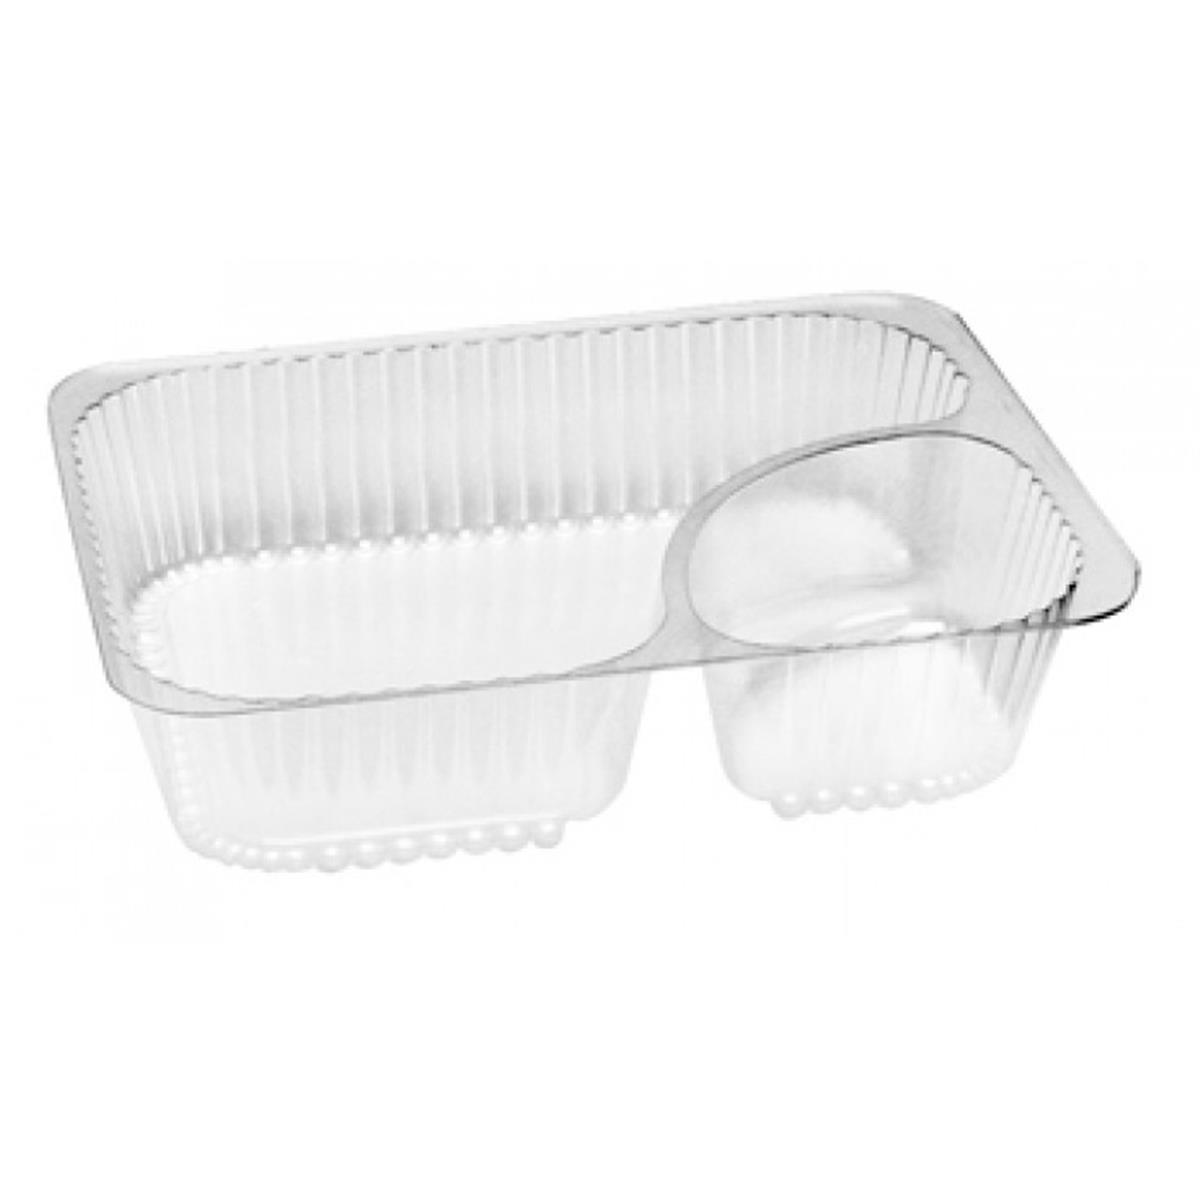 Picture of PACTIVORATION 0TH100110000 Satin ware - Case of 500